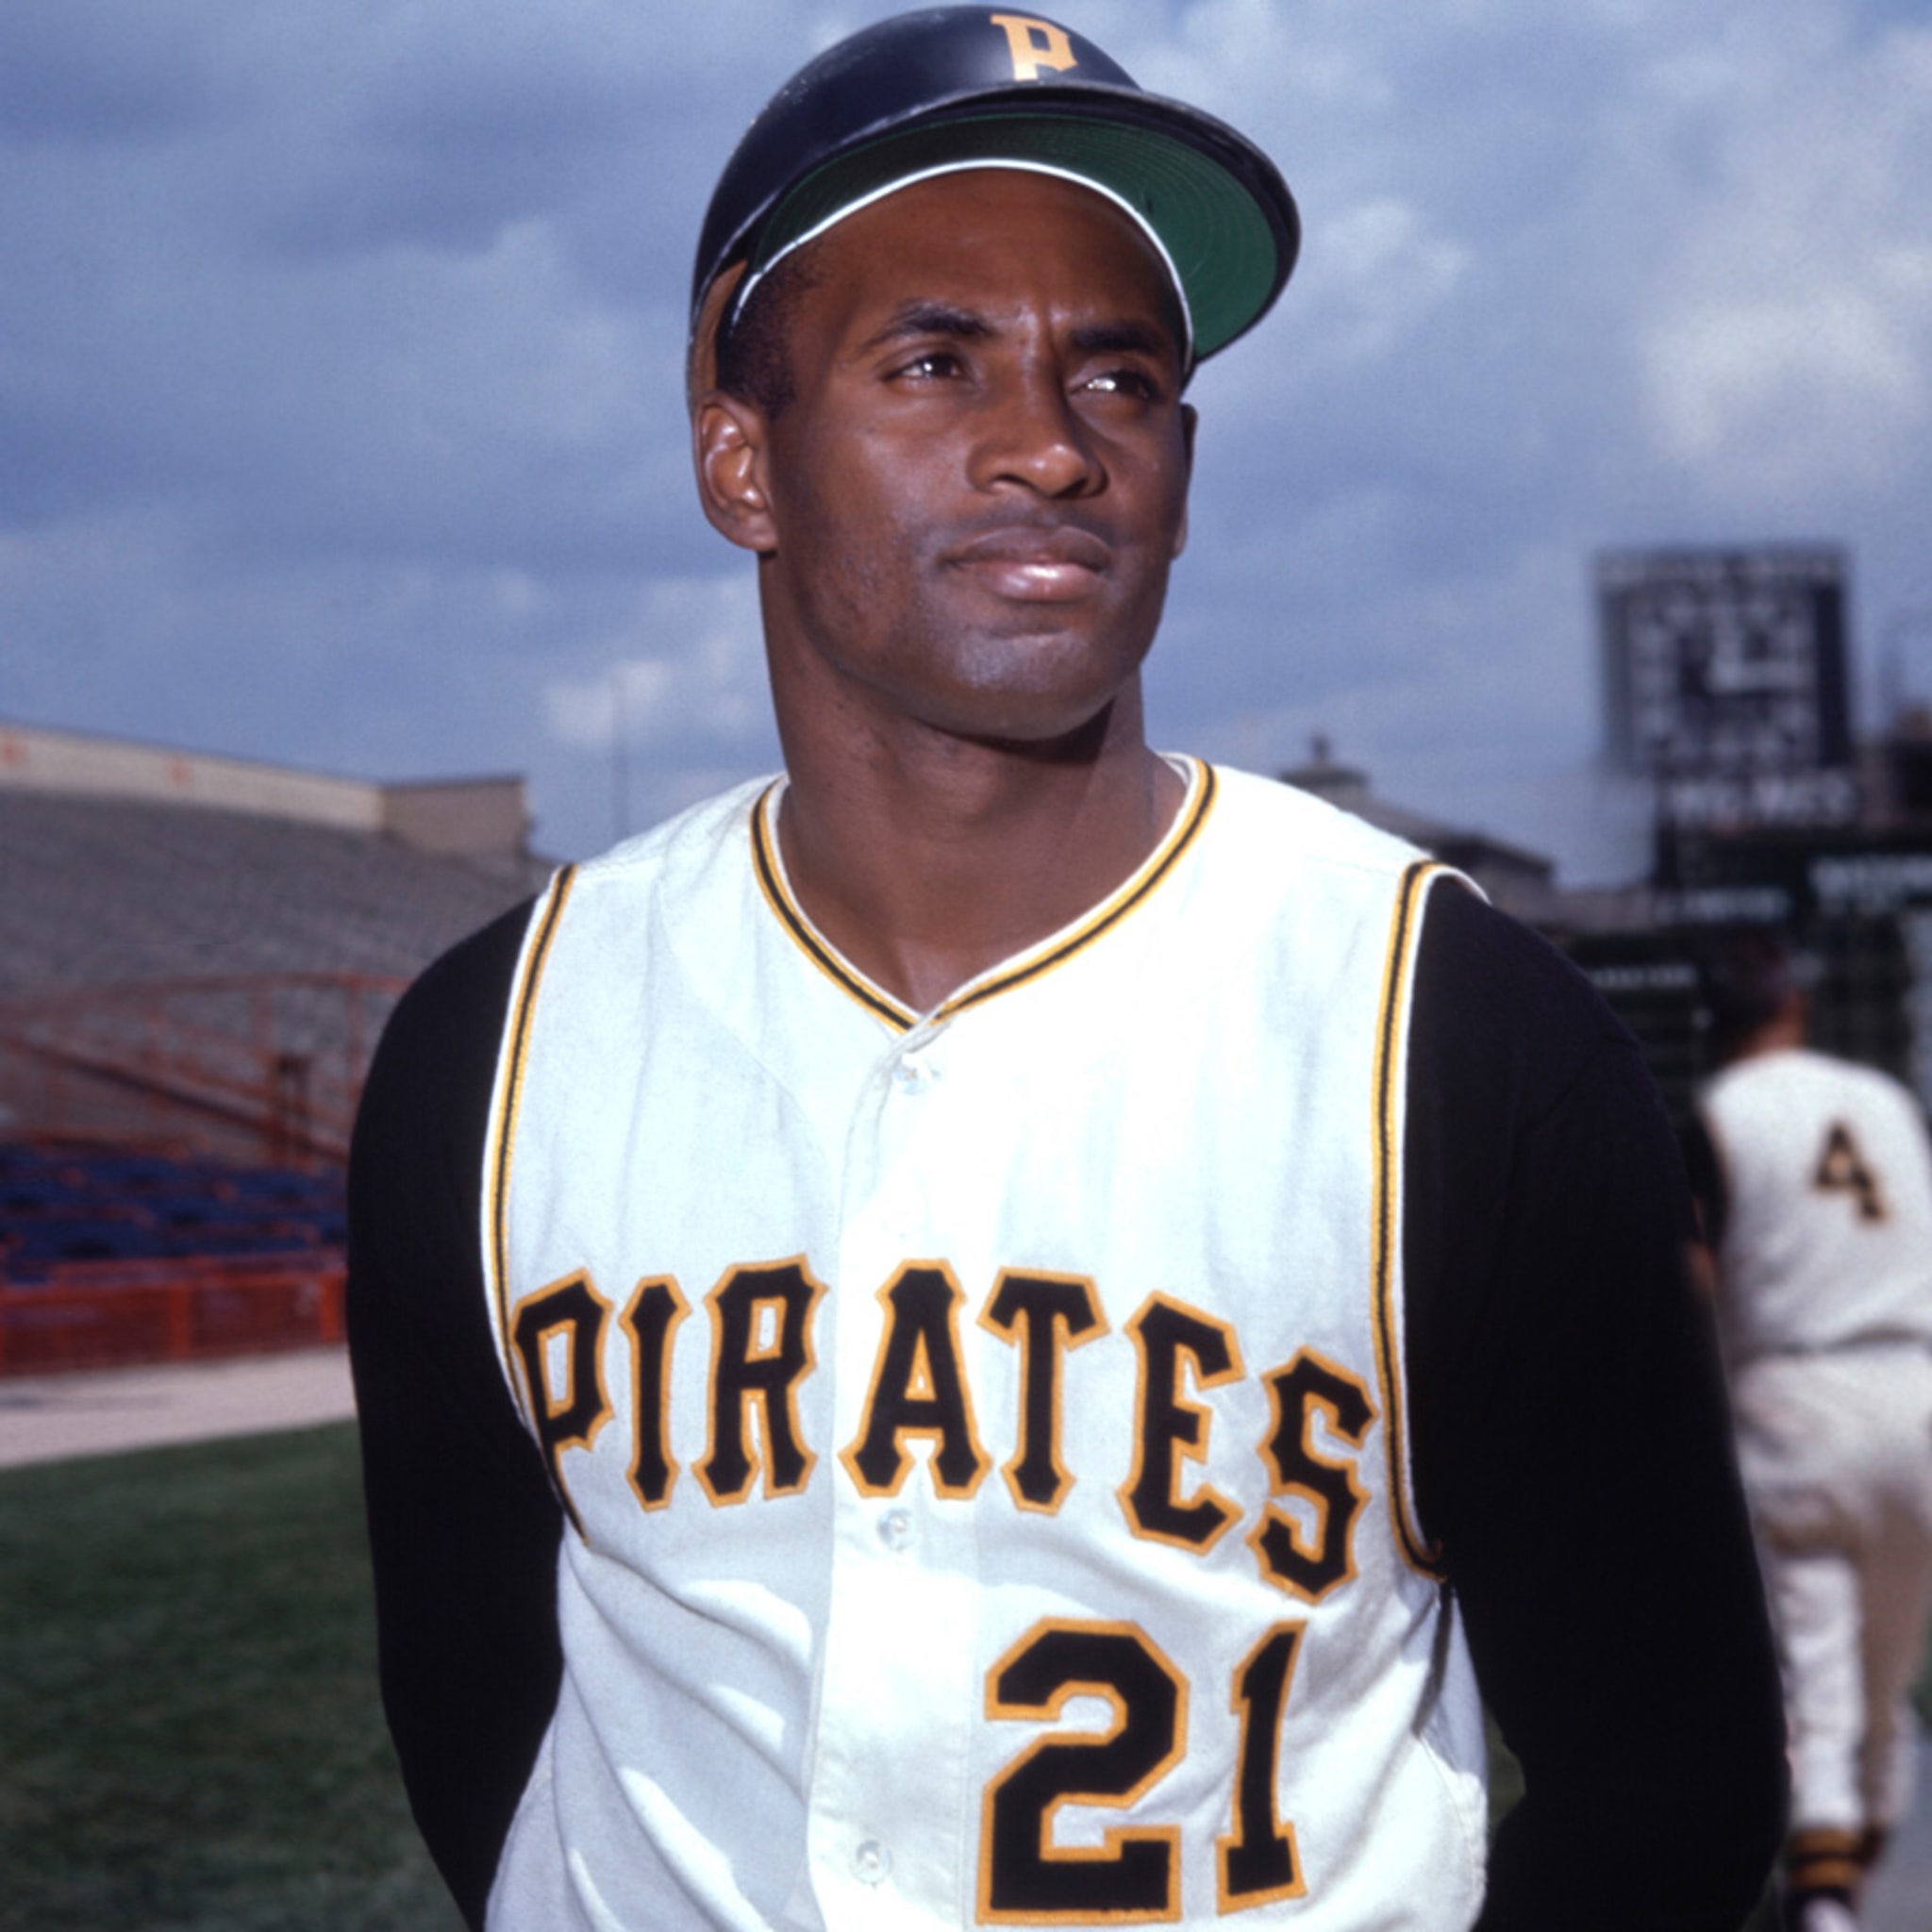 Pirates to wear No. 21 on Sept. 9 to honor Roberto Clemente